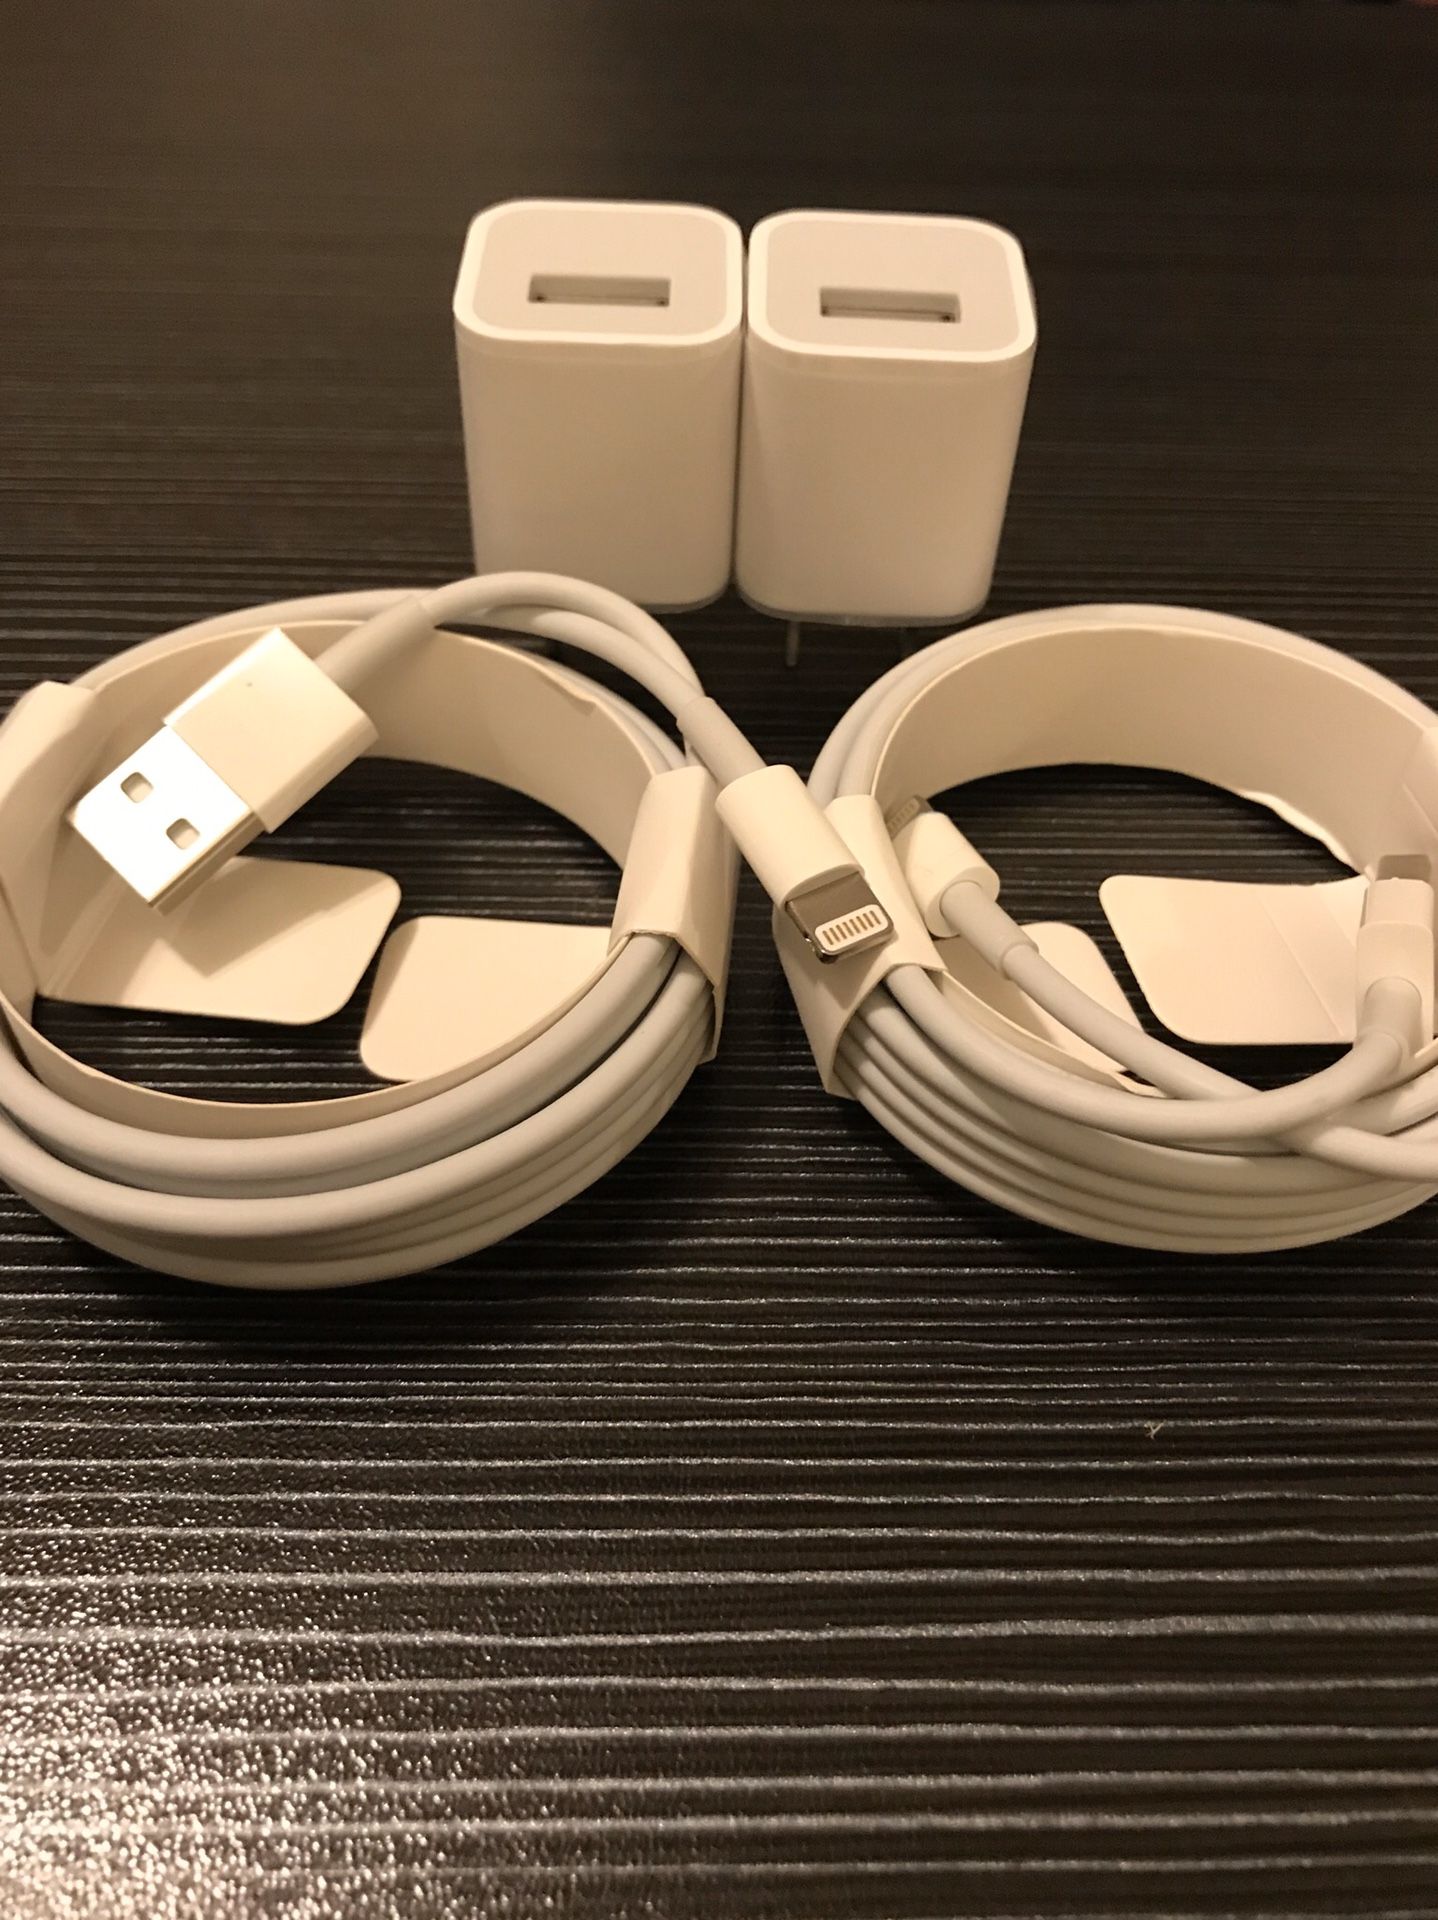 Apple iPhone Charger Sets x2 2m(6 feet)